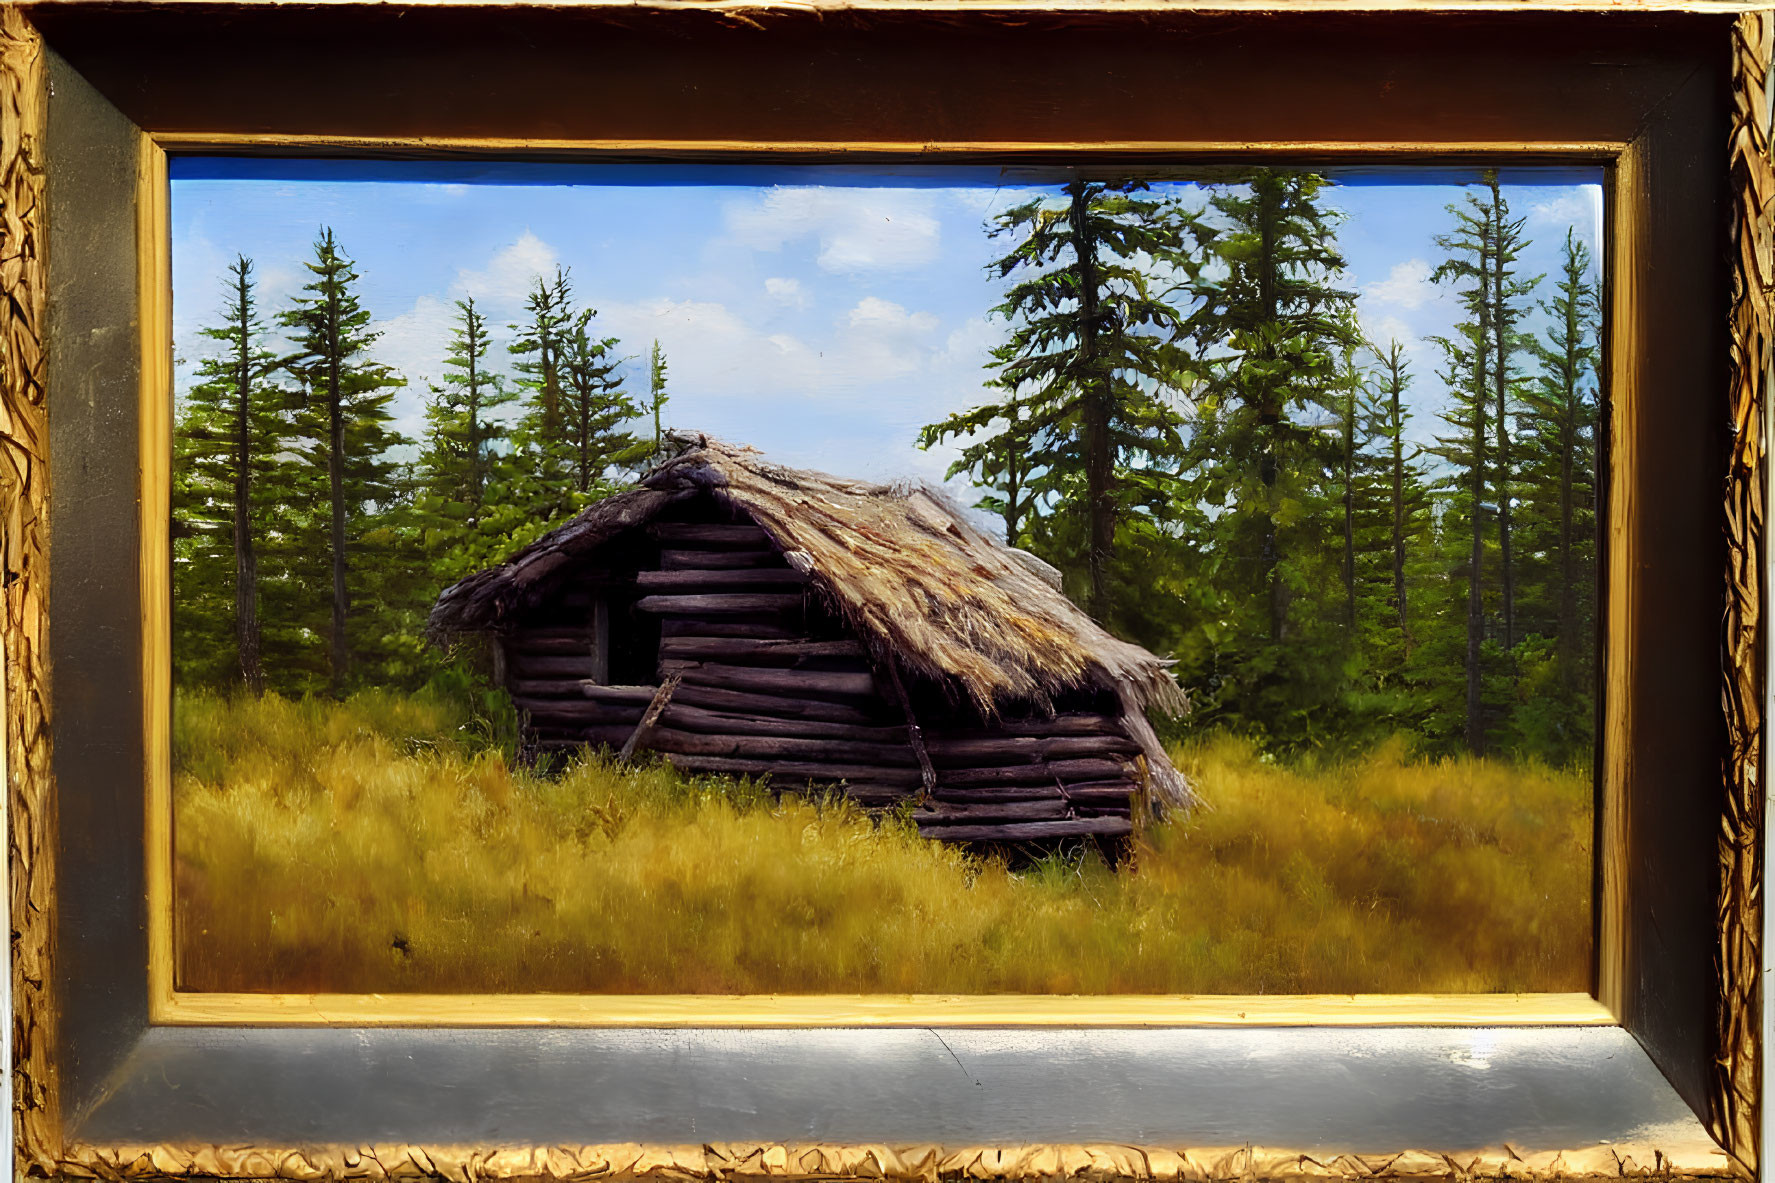 Dilapidated wooden cabin in golden frame with evergreen trees